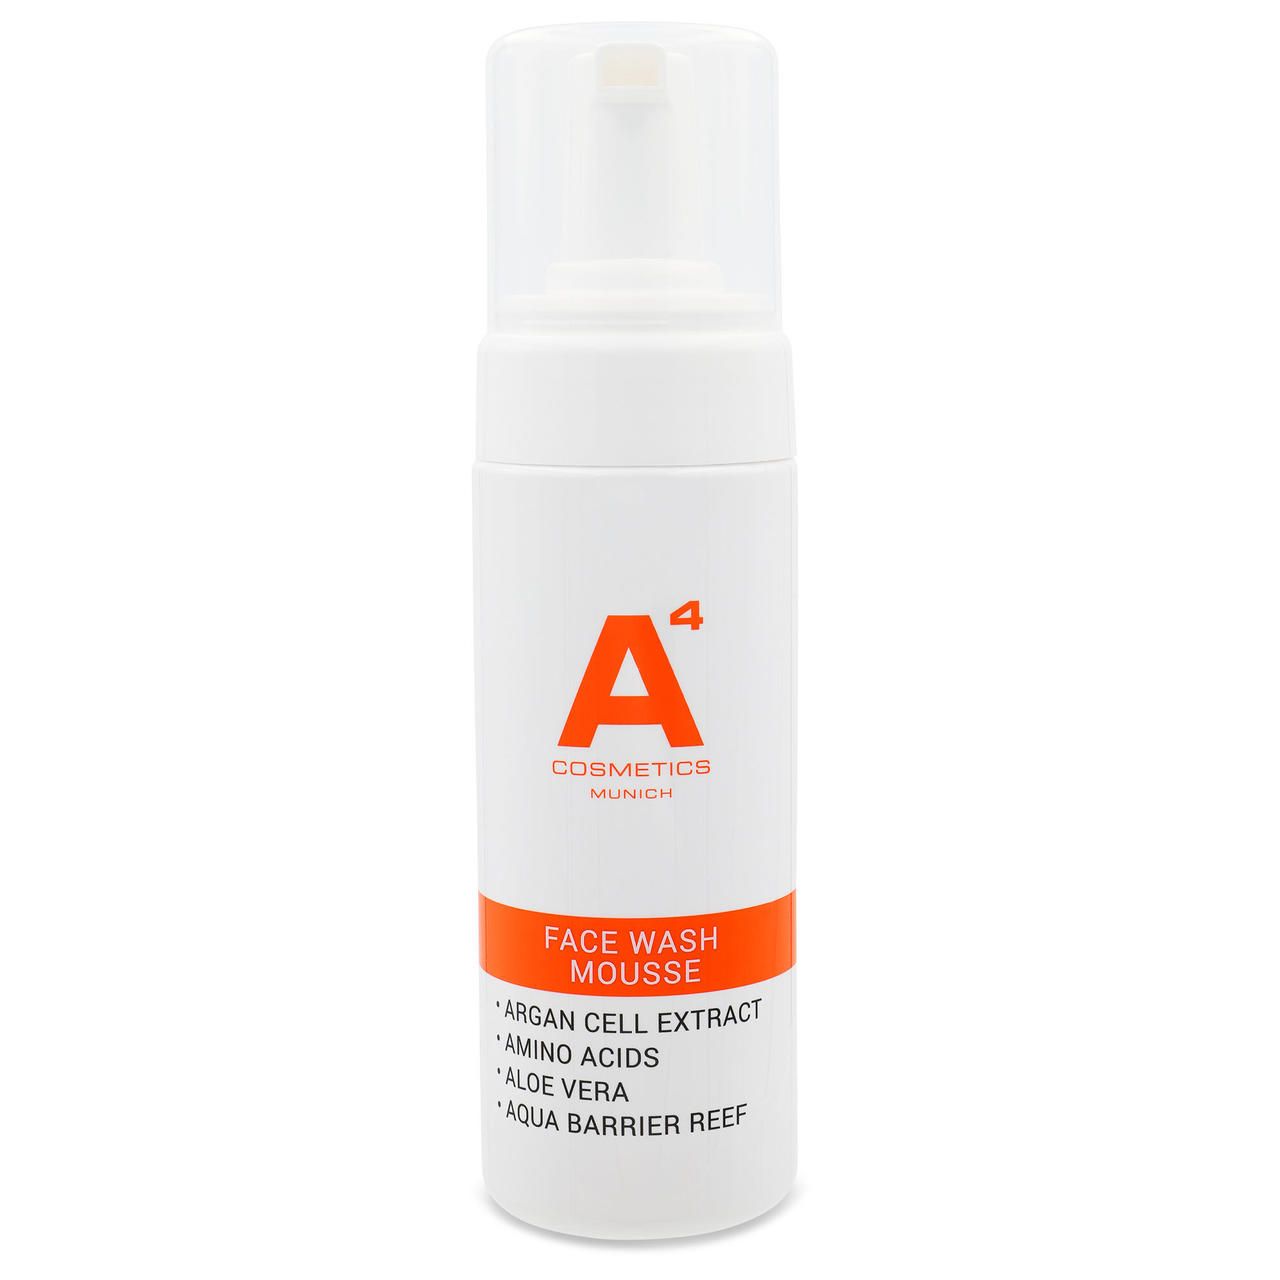 A4 Cosmetics, Face Wash Mousse